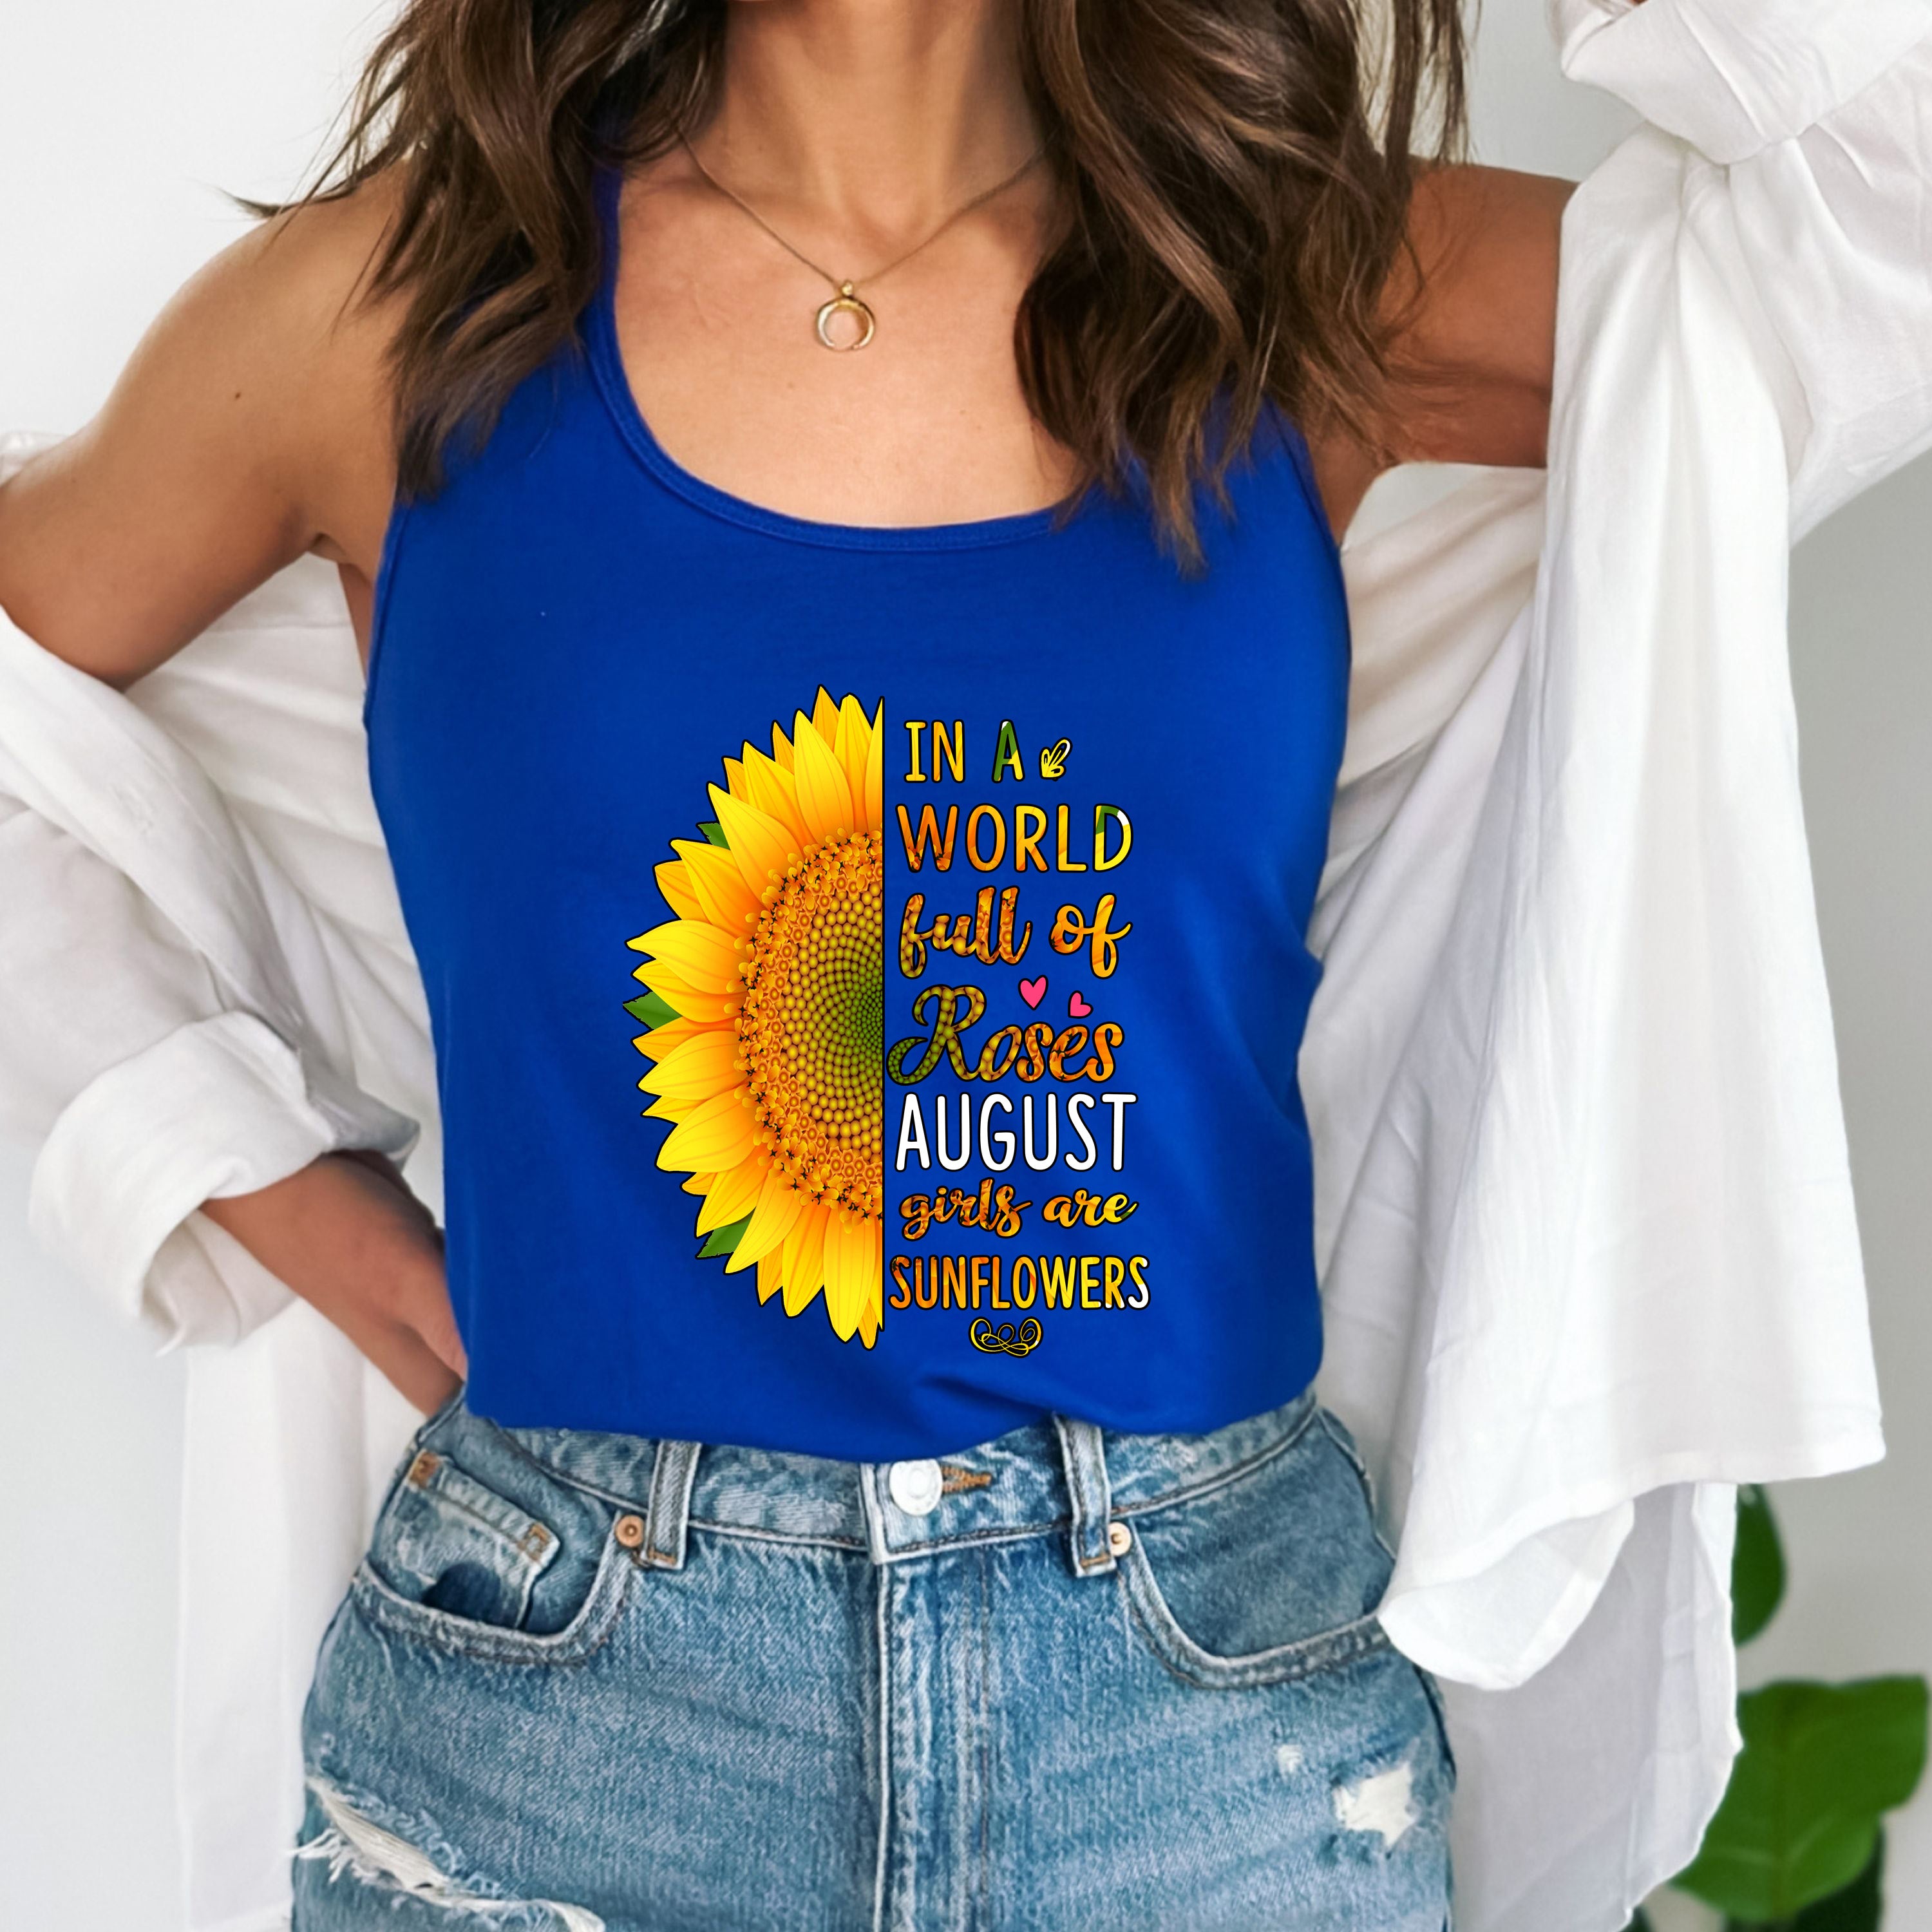 "In a world full of roses August girls are Sunflowers"